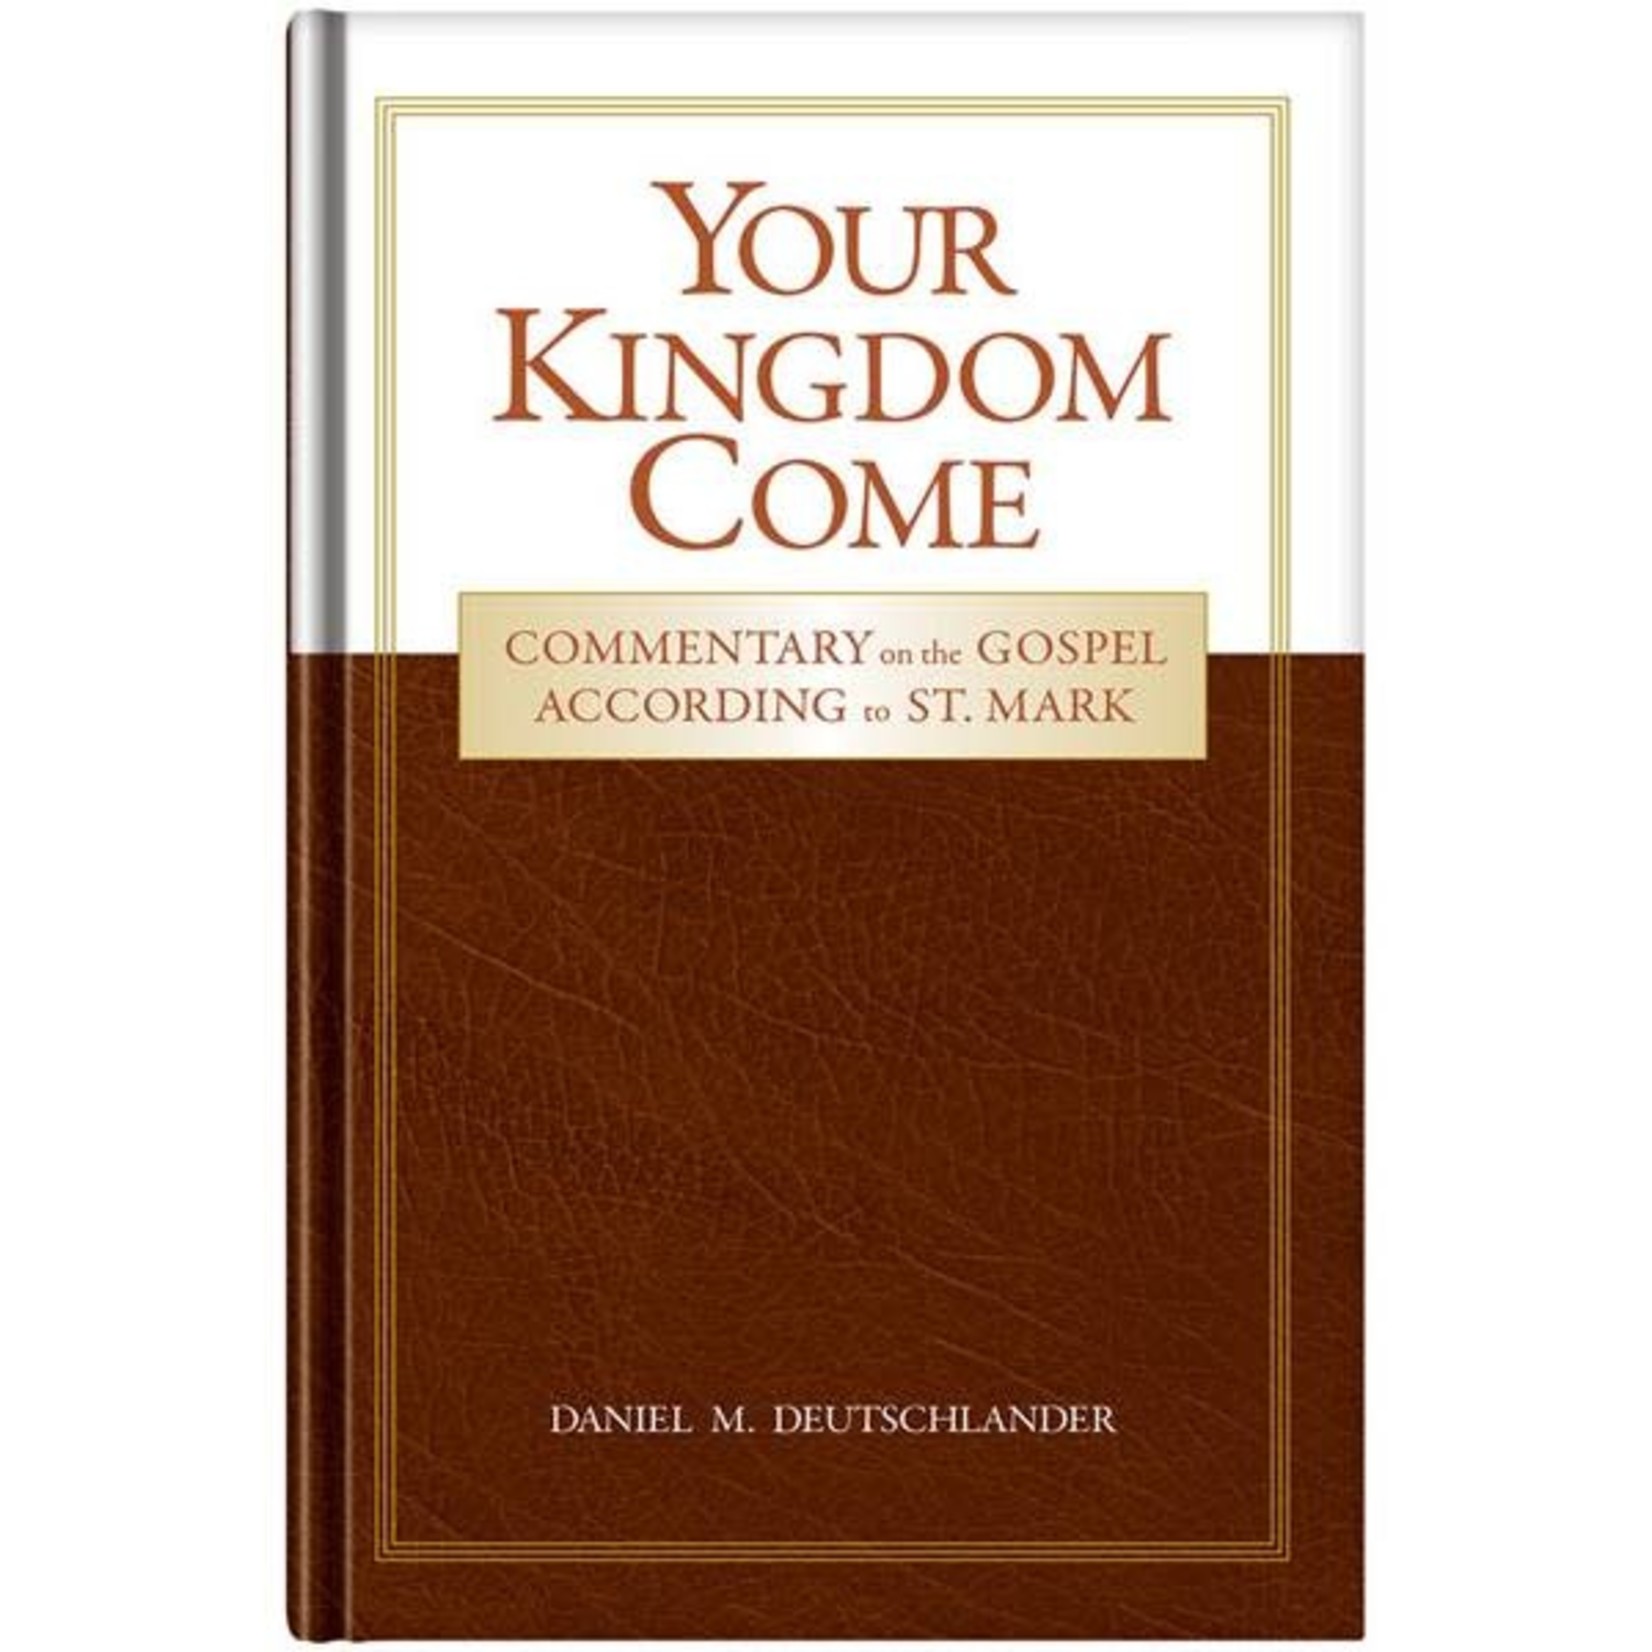 Your Kingdome Come - Commentary on the Gospel According to St. Mark